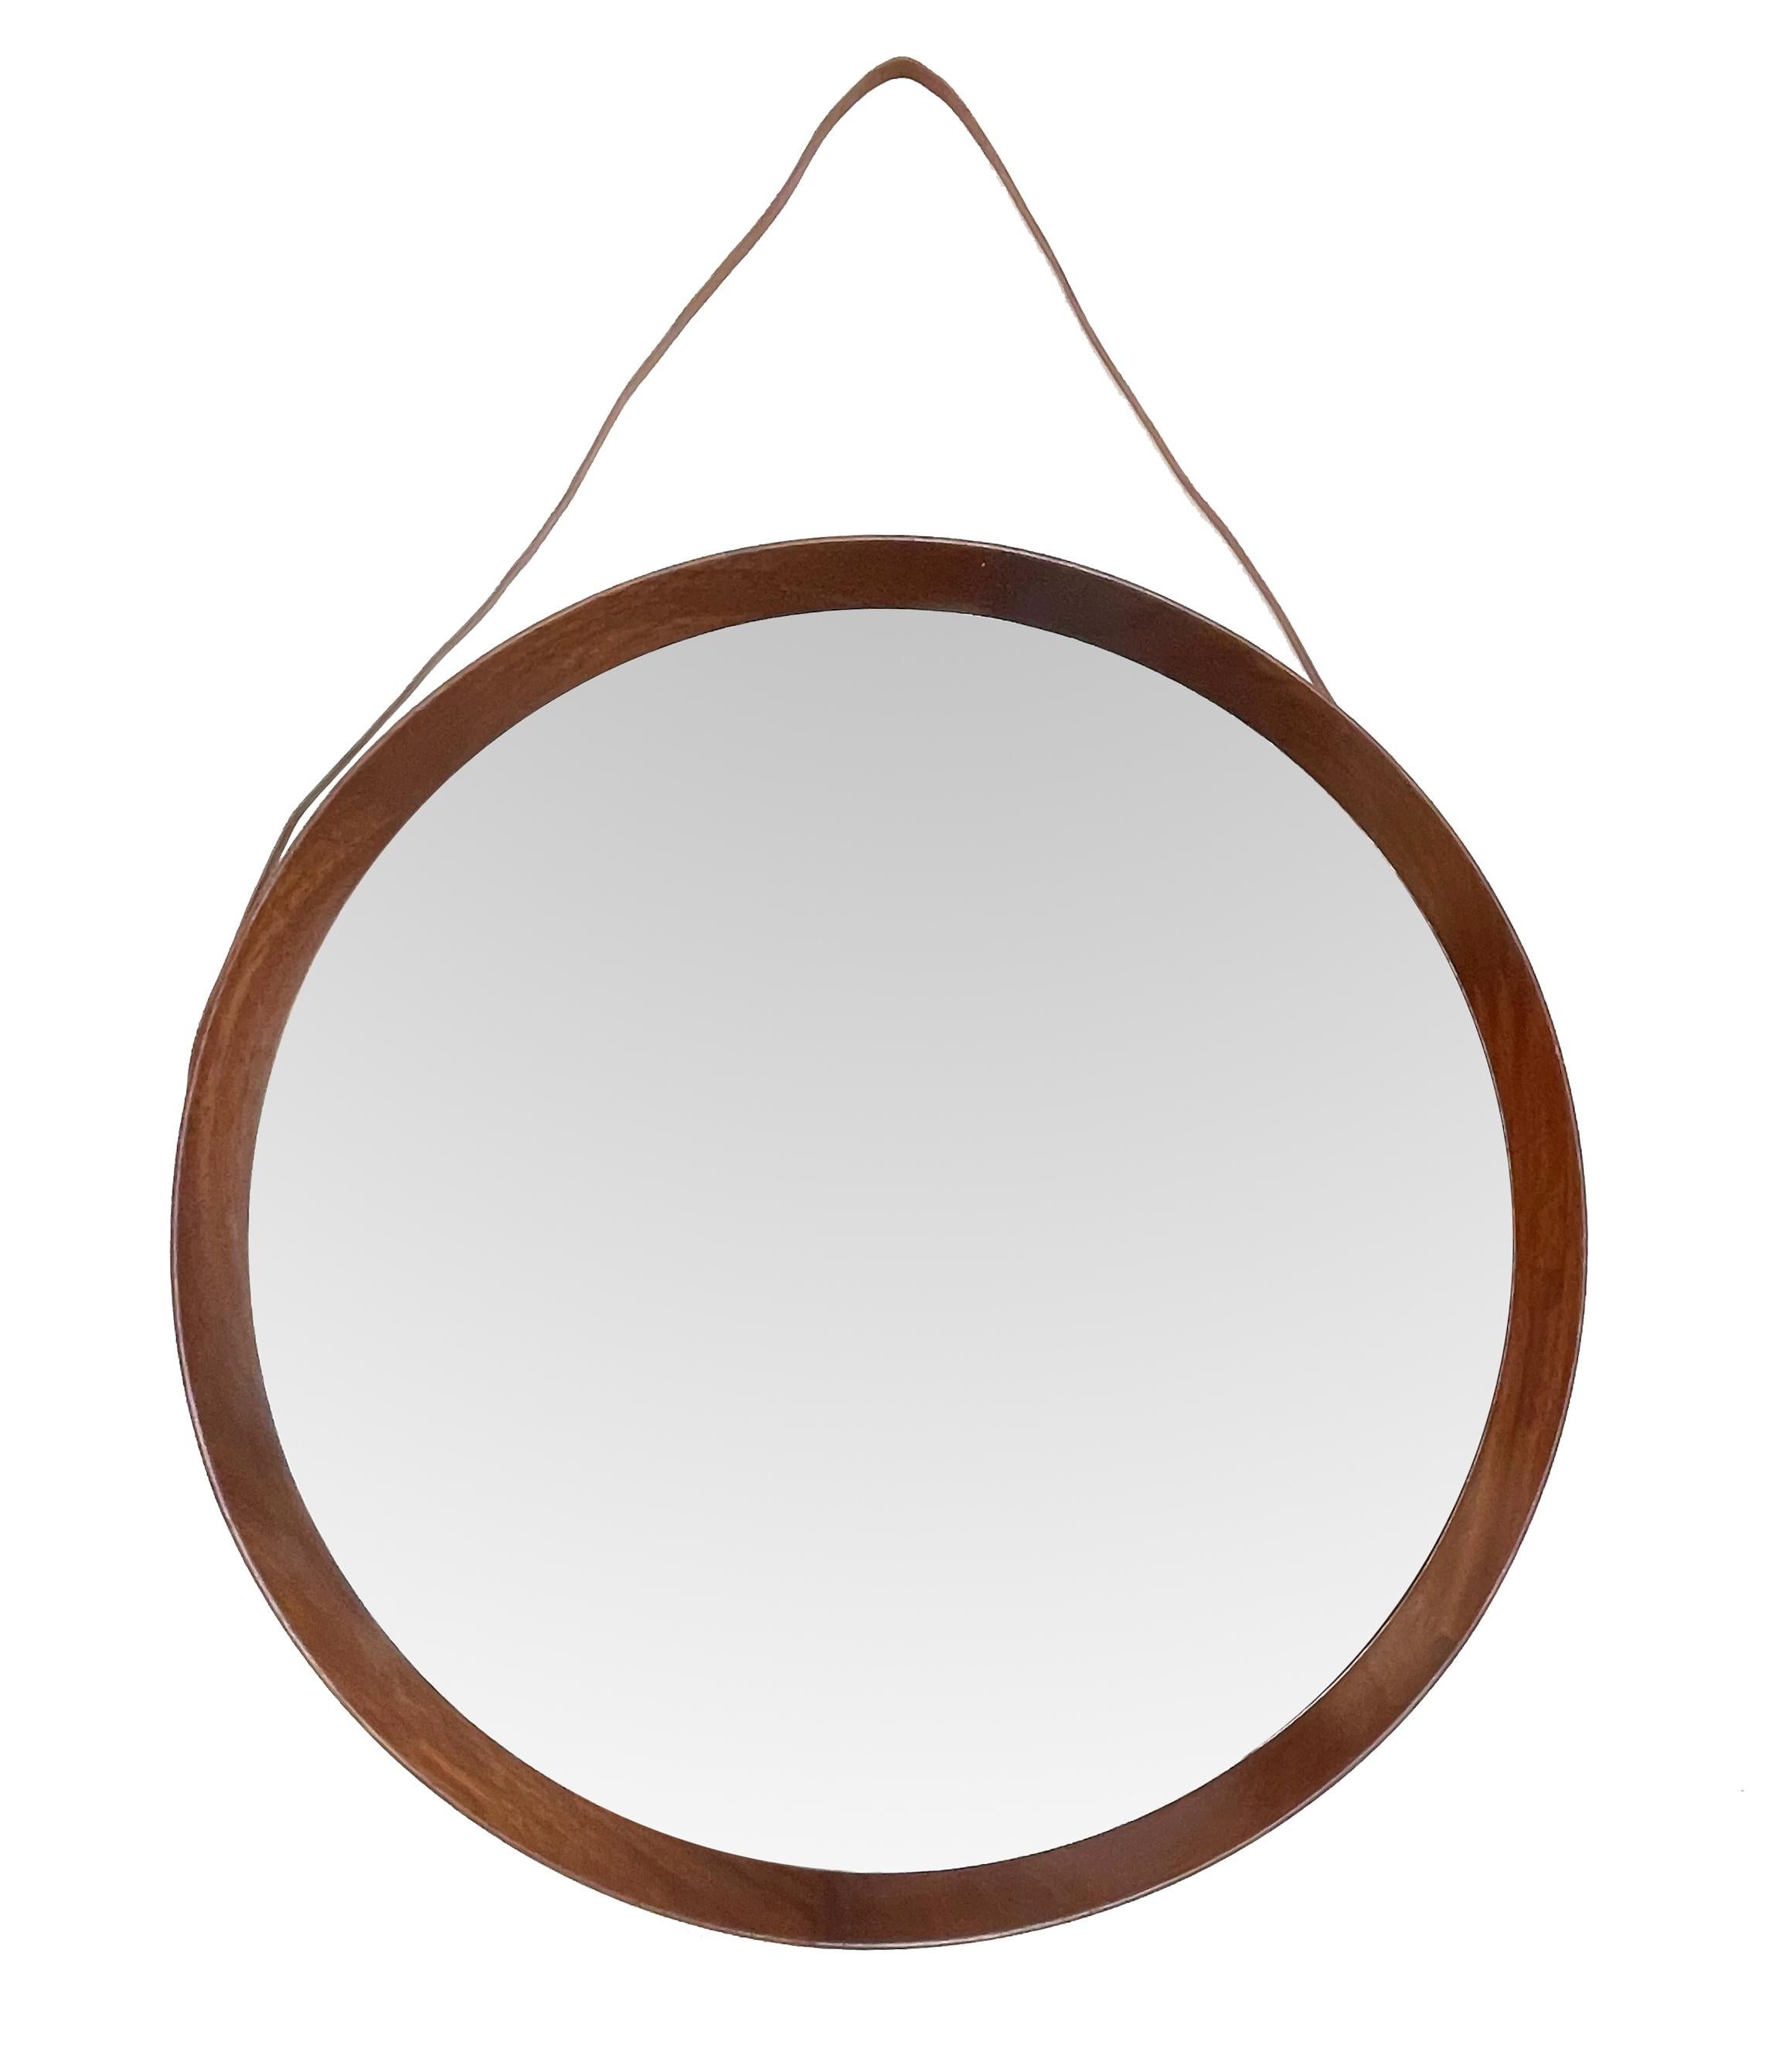 Uno & Östen Kristiansson Wood and Leather Swedish Wall Mirror for Luxus, 1960s For Sale 5